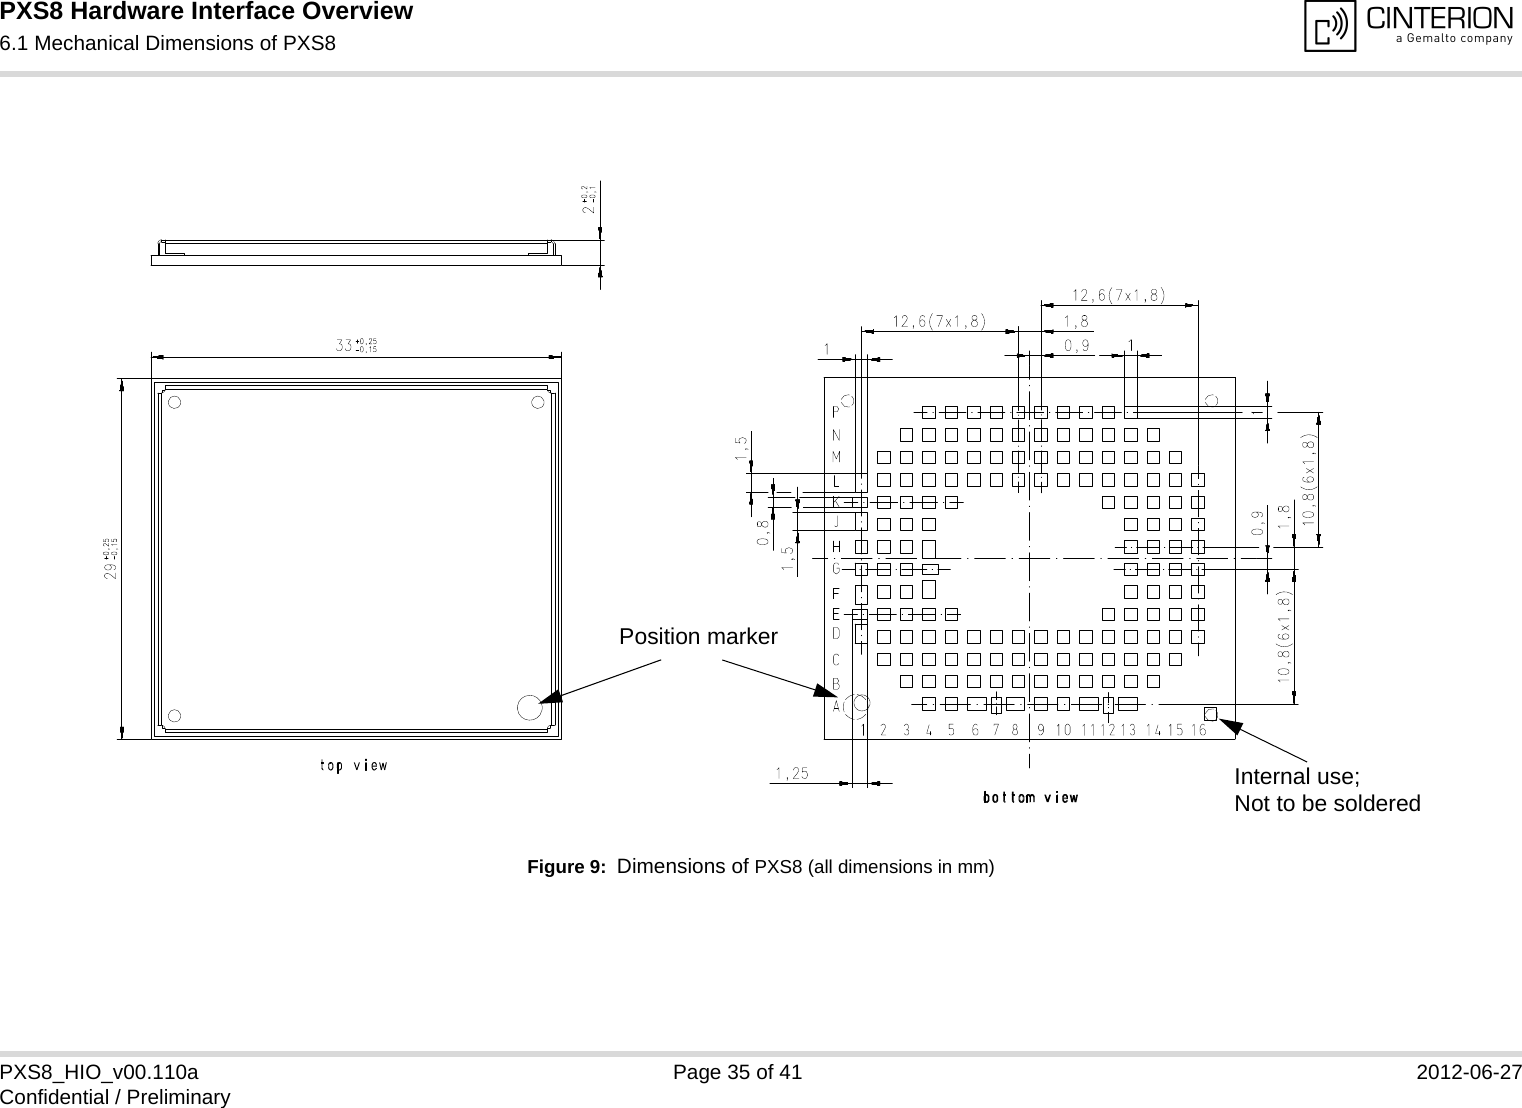 PXS8 Hardware Interface Overview6.1 Mechanical Dimensions of PXS835PXS8_HIO_v00.110a Page 35 of 41 2012-06-27Confidential / PreliminaryFigure 9:  Dimensions of PXS8 (all dimensions in mm)Internal use; Not to be solderedPosition marker